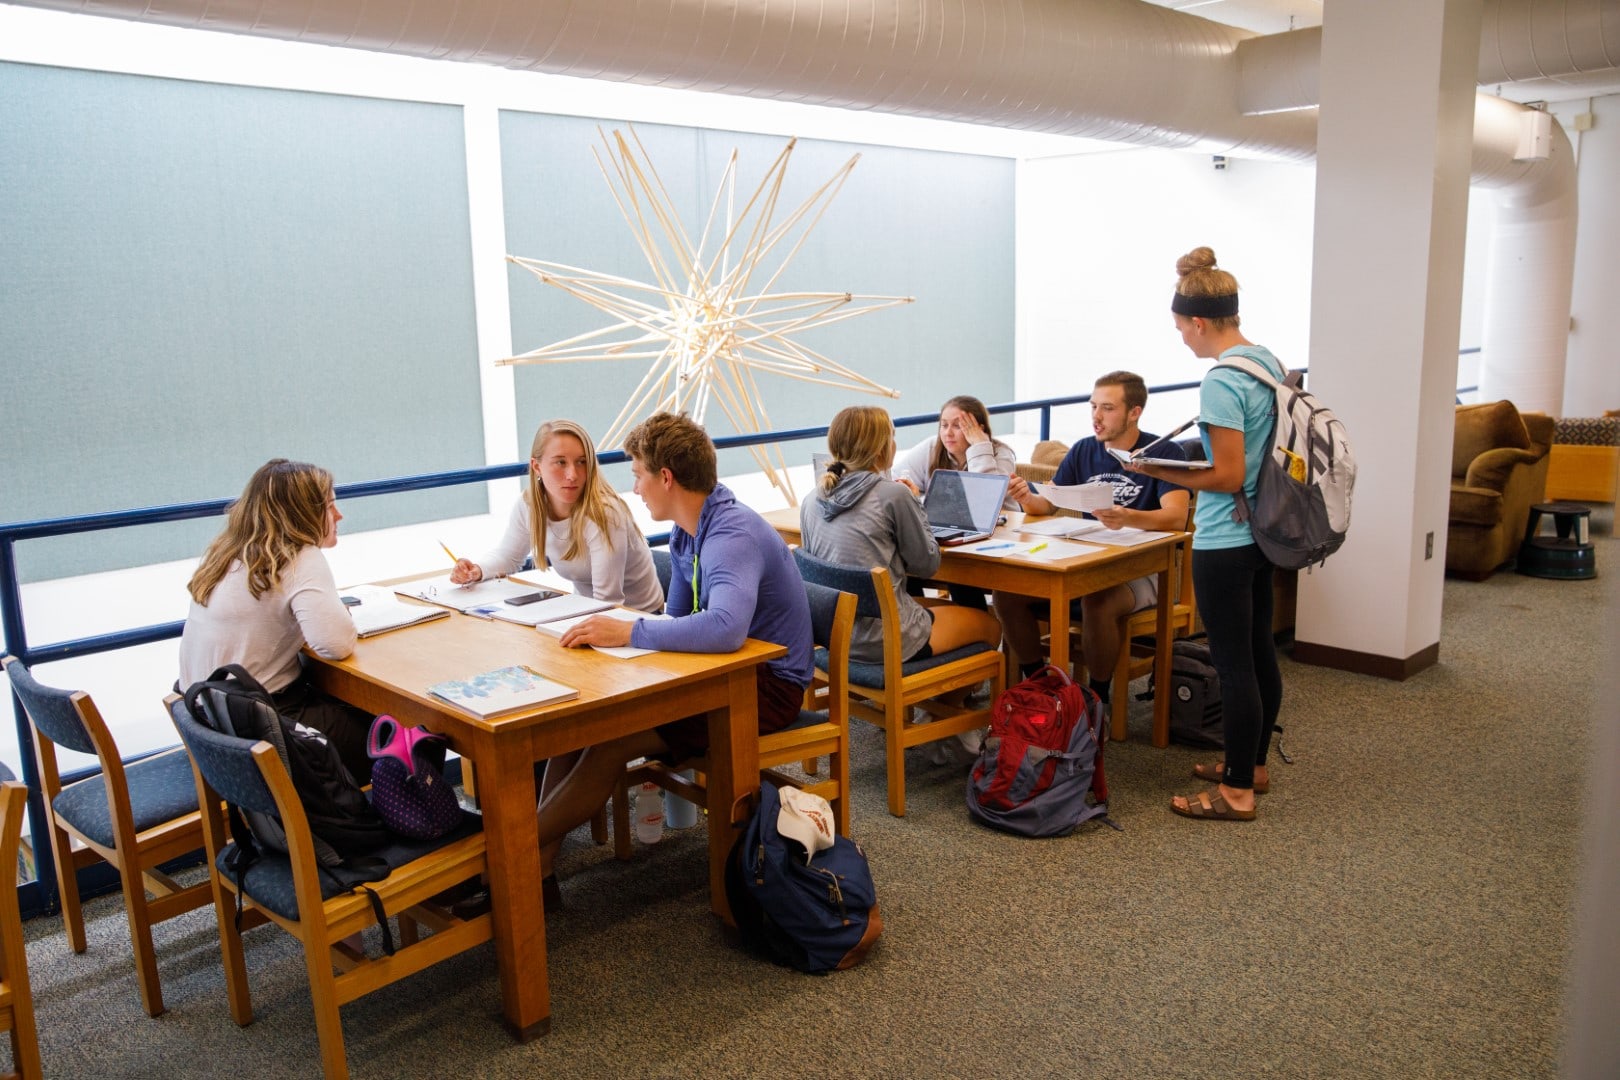 Groups of students in a brightly lit study space in the Castleton library.